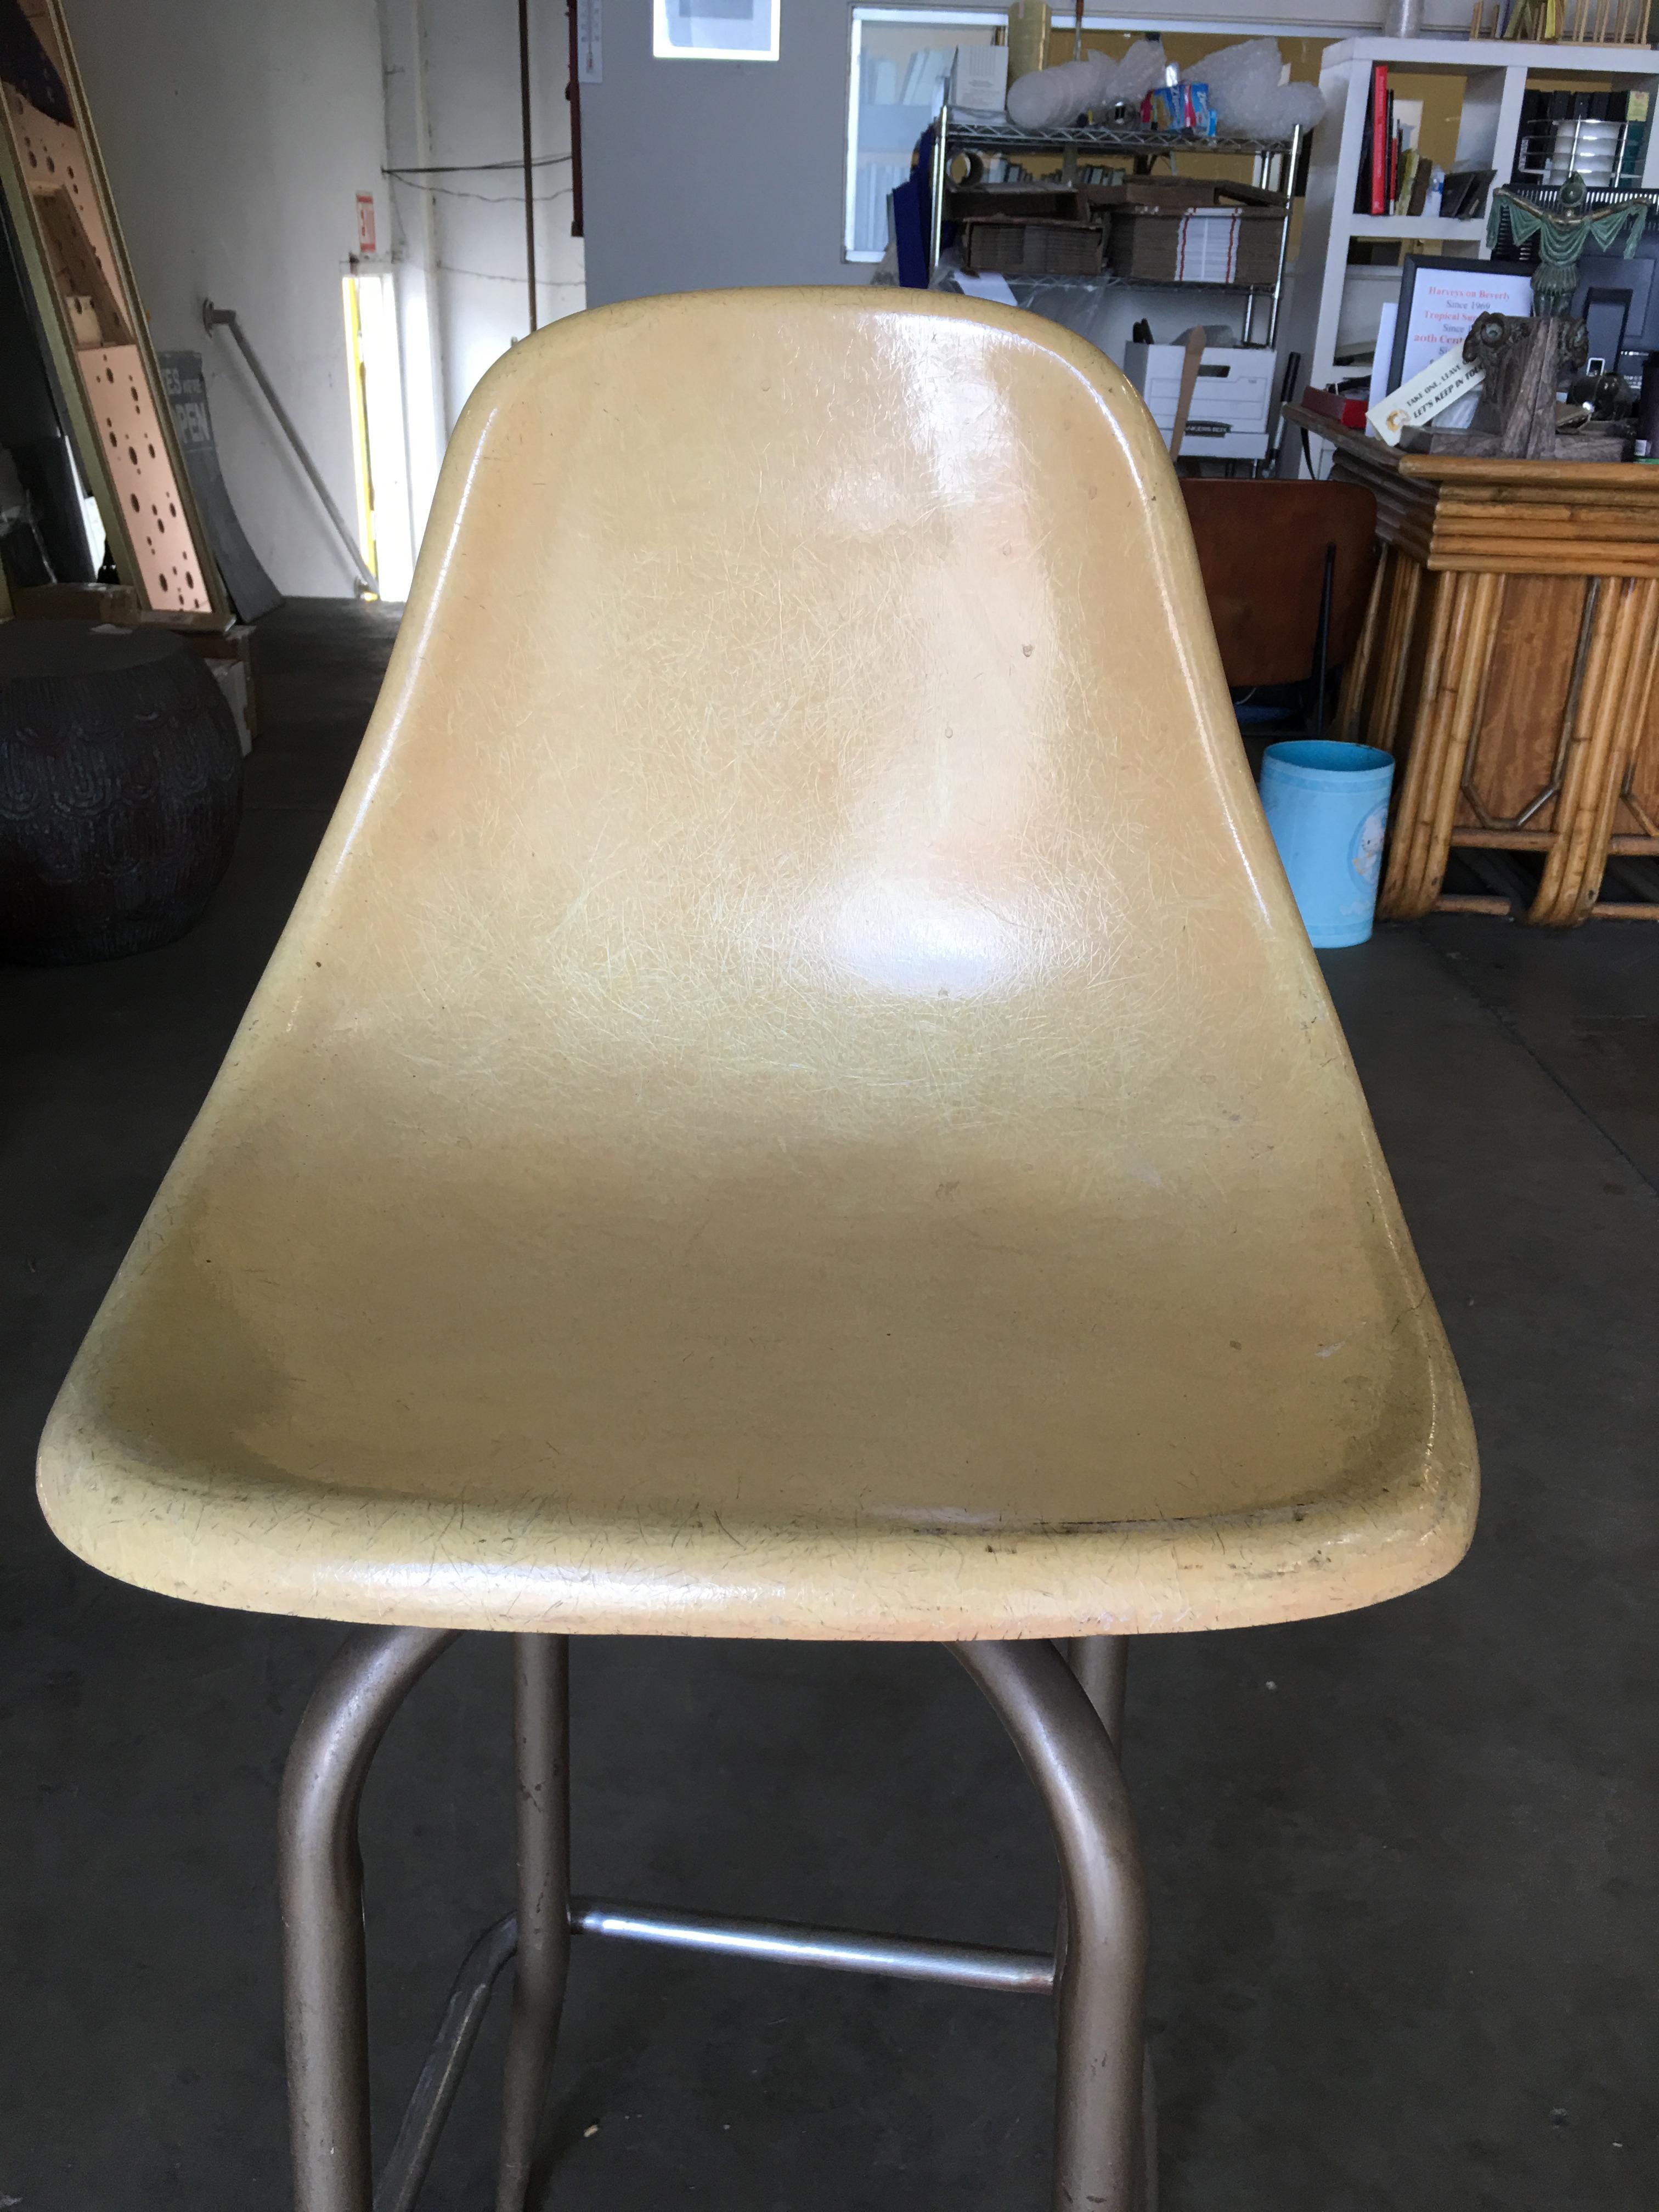 Midcentury Fiberglass Shell Swivel Bar Stool, Pair In Good Condition For Sale In Van Nuys, CA